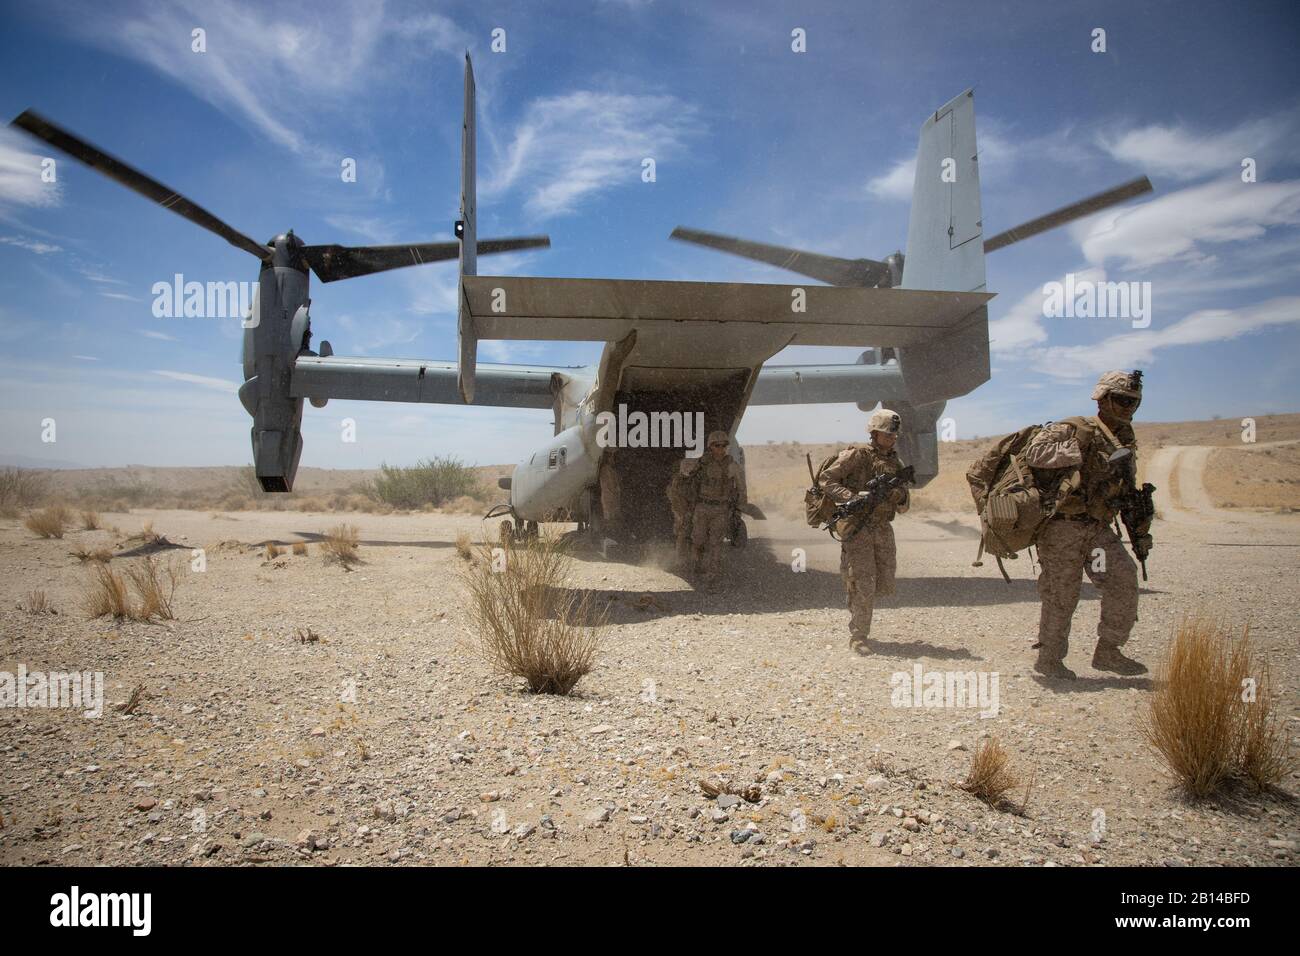 U.S. Marines assigned to 2nd Battalion, 7th Marine Regiment dismount an MV-22B Osprey assigned to Marine Medium Tiltrotor Squadron 263 while conducting a tactical insert during Integrated Training Exercise (ITX) 5-19 at Marine Corps Air Ground Combat Center, Twenty-nine Palms, California, Aug. 3, 2019. ITX 5-19 is a large scale, combined-arms training exercise that produces combat-ready forces capable of operating as an integrated Marine Air-Ground Task Force. (U.S. Marine Corps photo by Cpl. Cody Rowe) Stock Photo